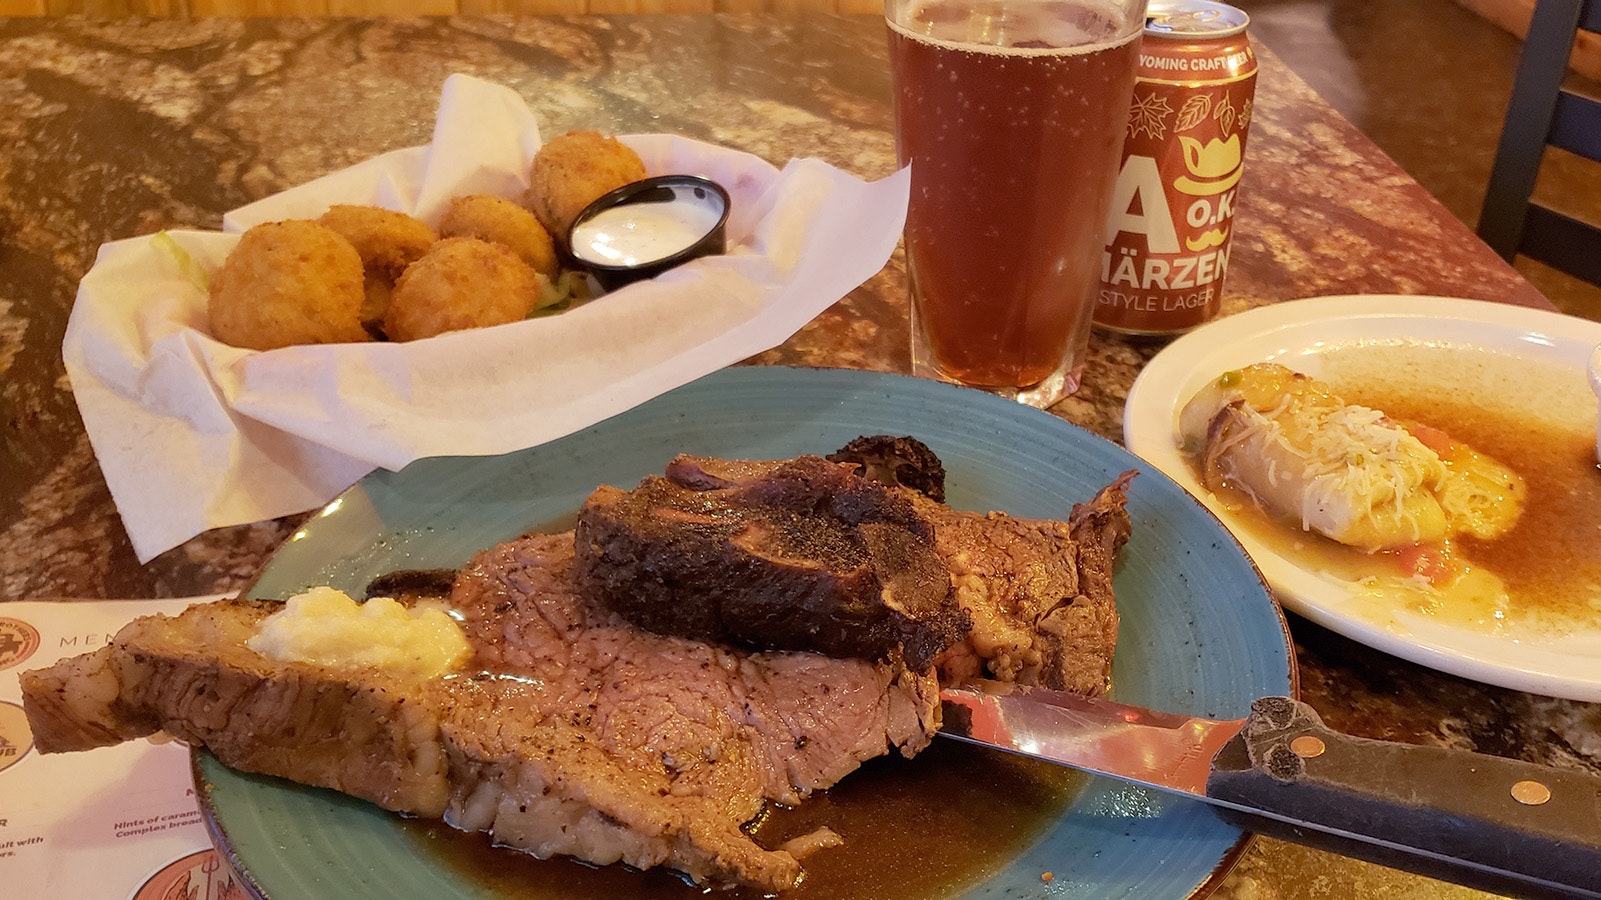 Prime rib with the signature mini chimichanga on the side, a basket of fried mushrooms and an A-OK Marzen, one of a dozen Wyoming craft beers available at Michael's Big City Steakhouse.